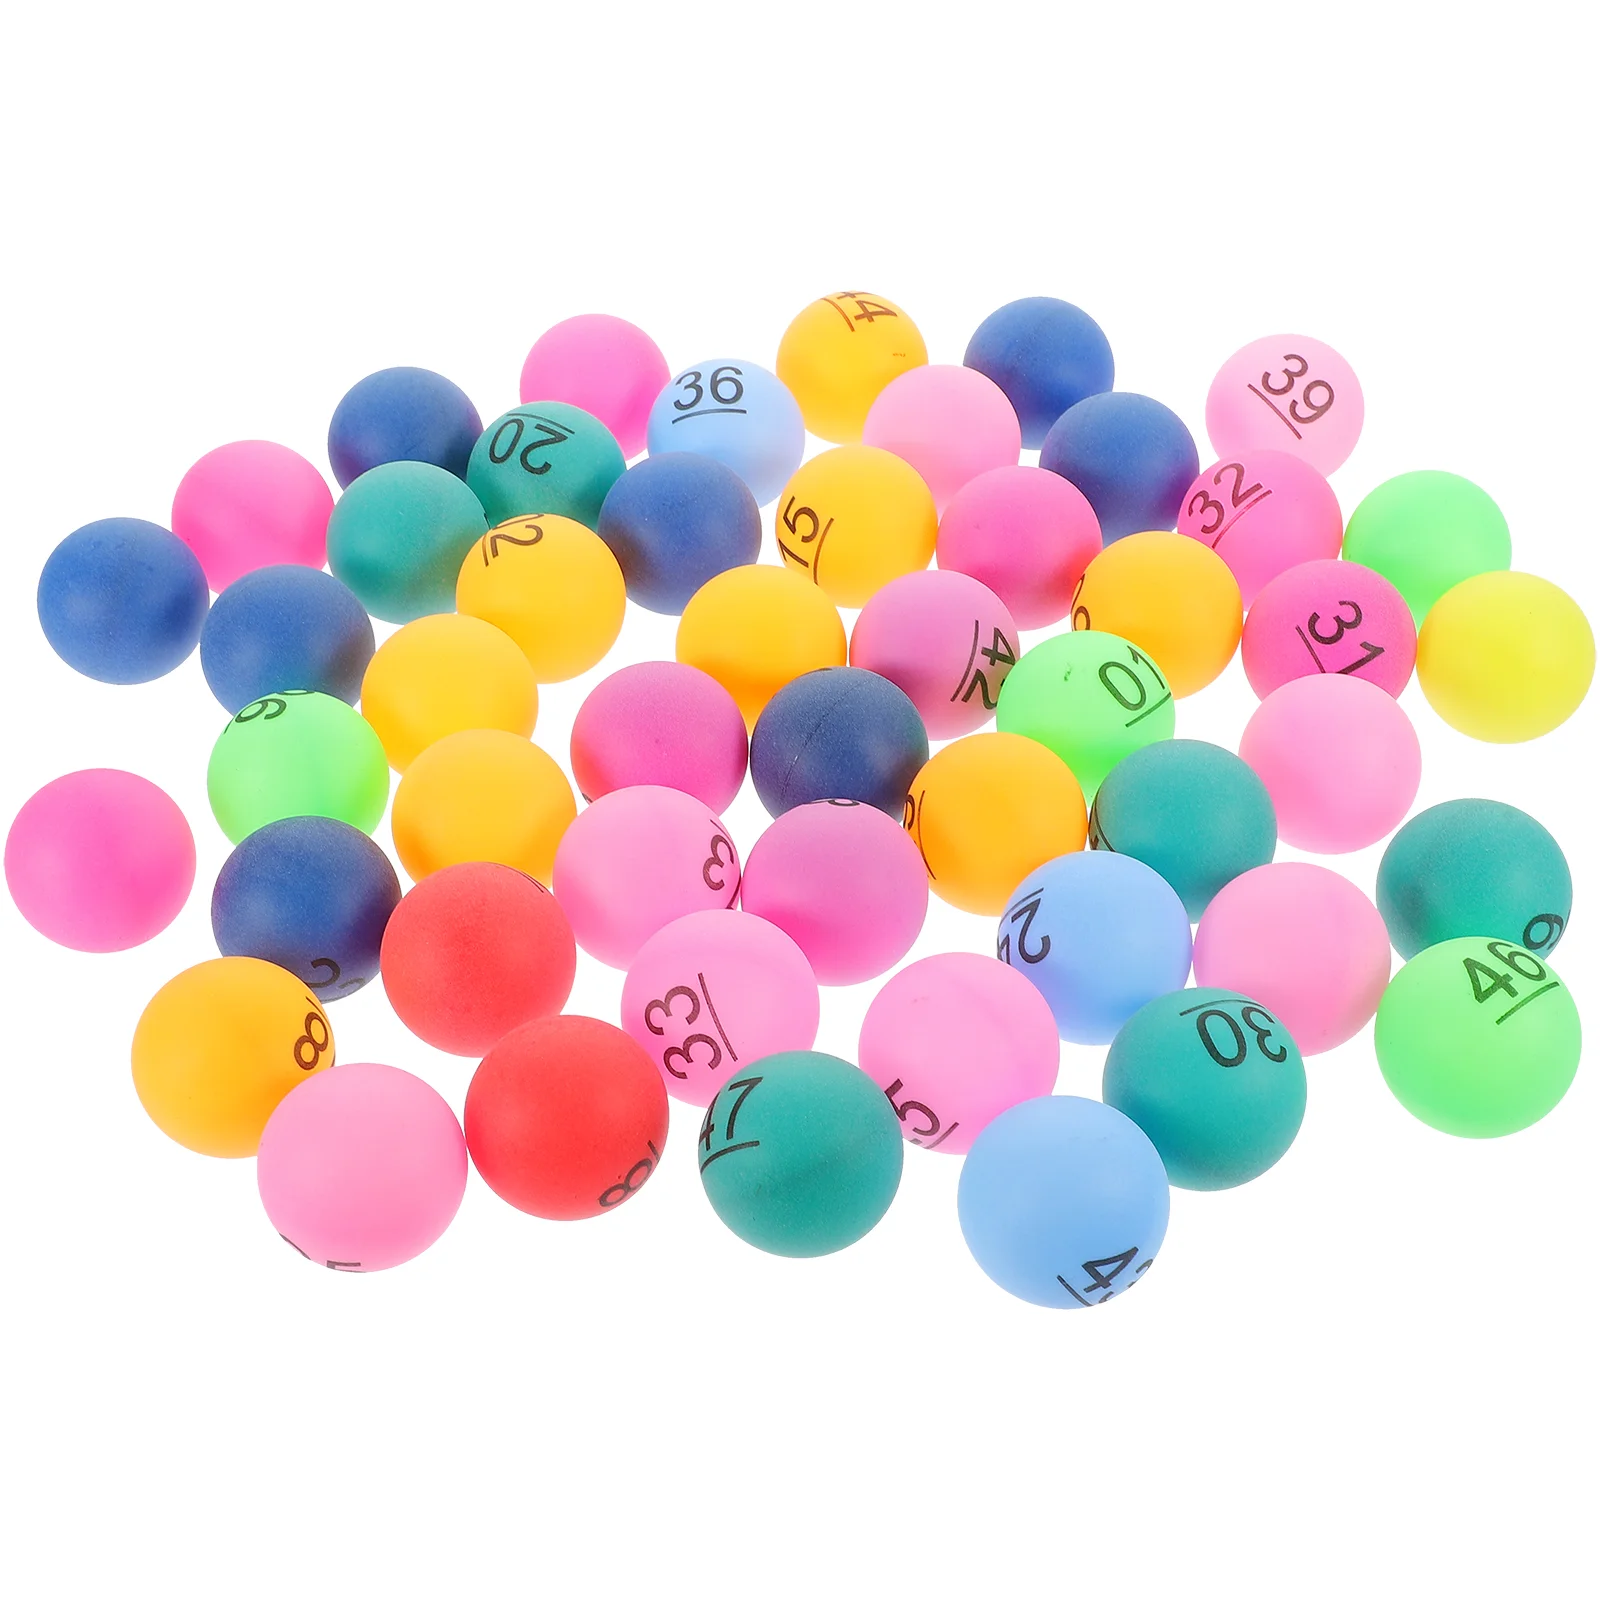 

50 Pcs Digital Table Tennis Celebration Raffle Drawing Balls Plastic Game Night for Home Party Entertainment Pp Calling